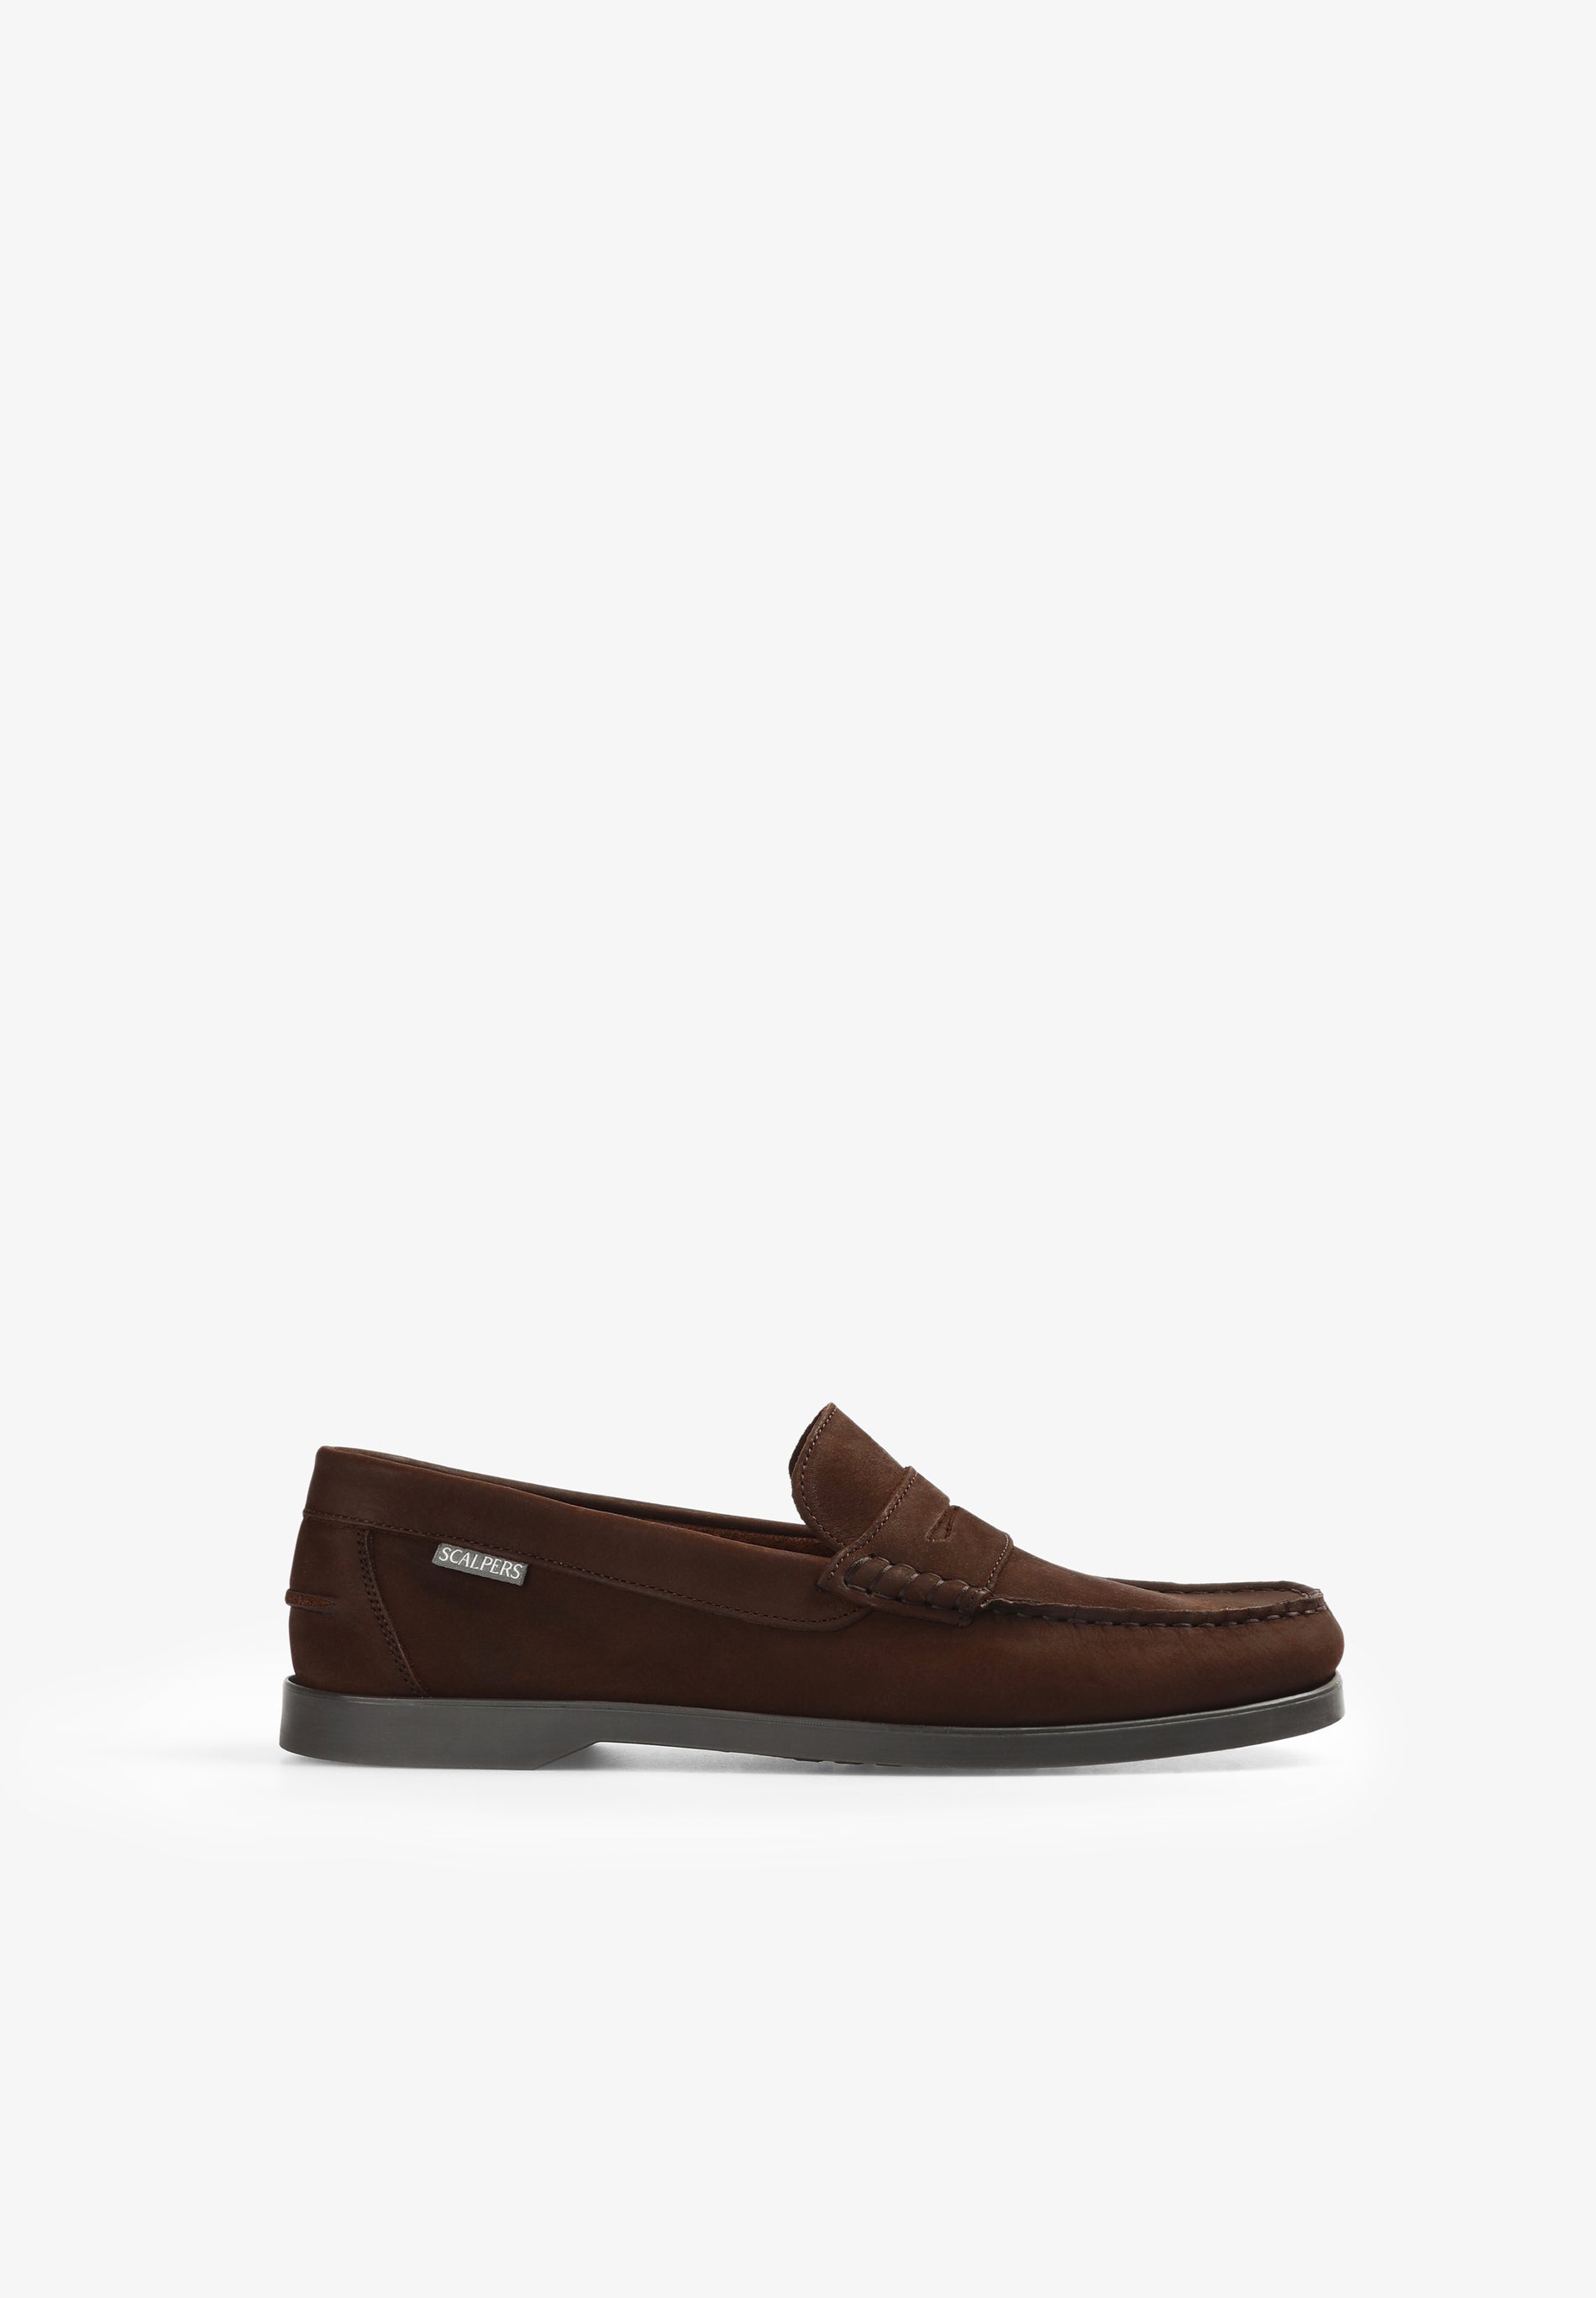 BLAKE LOAFERS SHOES